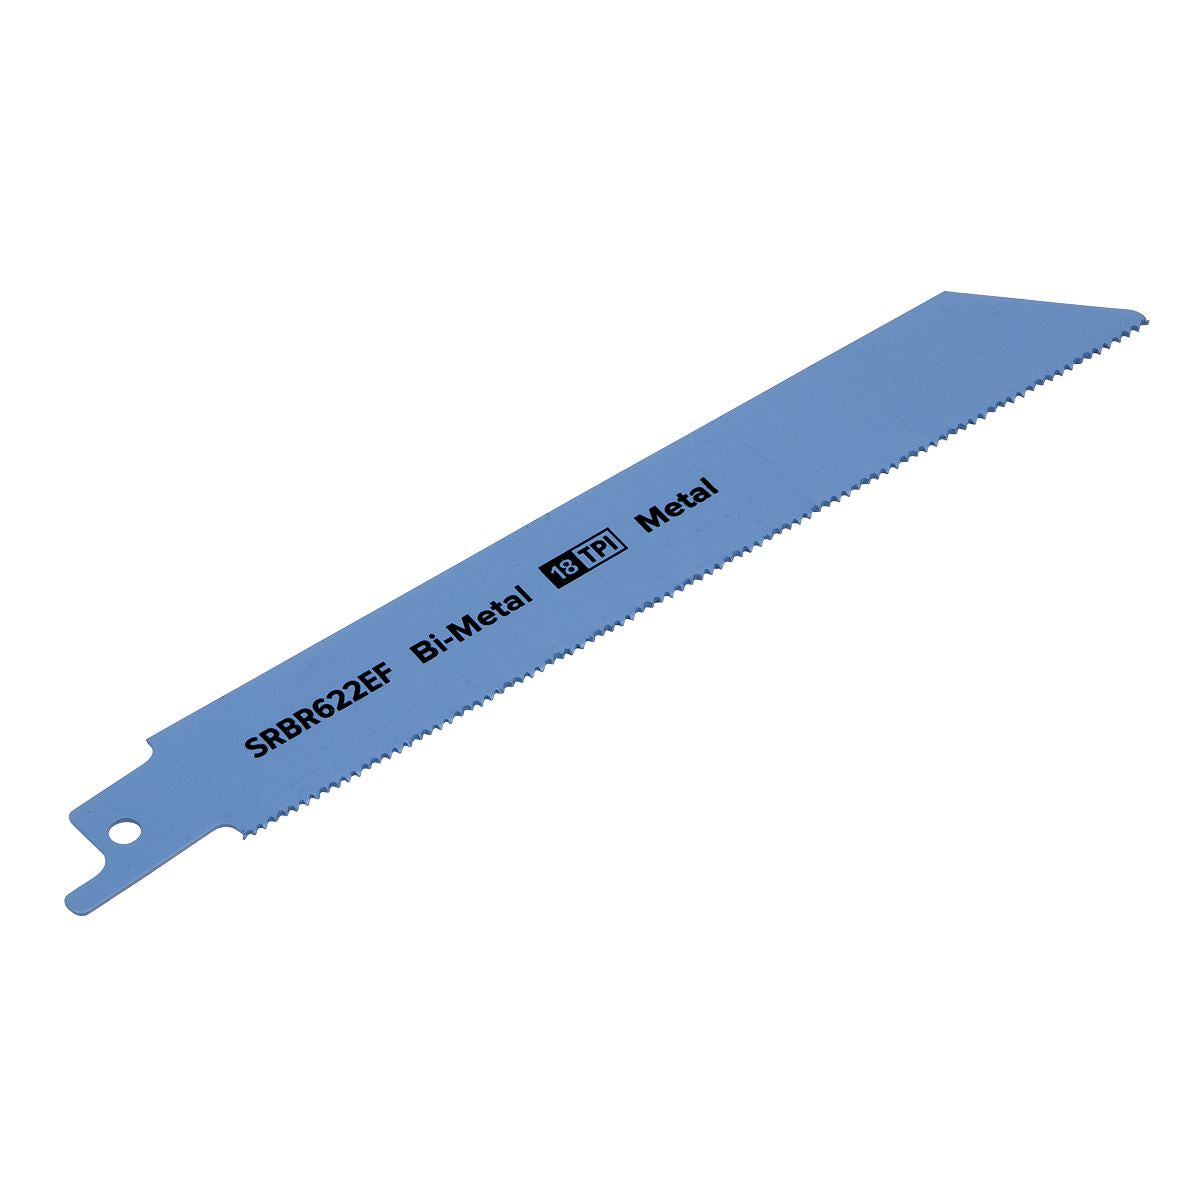 Sealey Reciprocating Saw Blade Metal 150mm 18tpi - Pack of 5